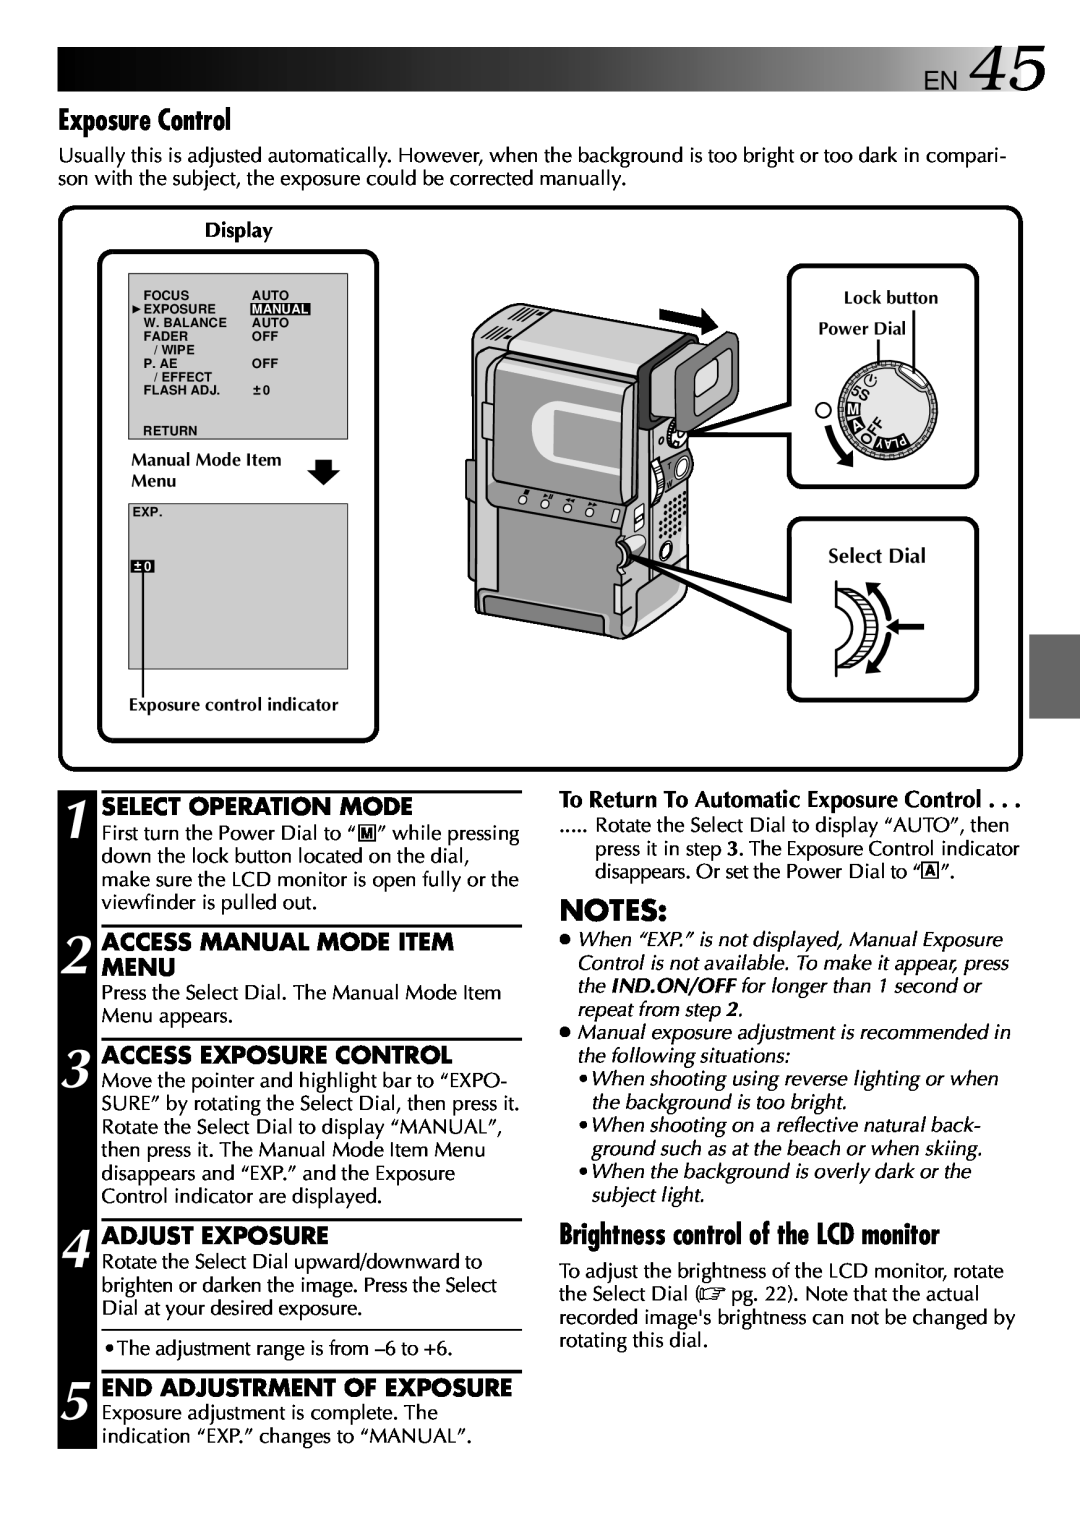 JVC 0797TOV*UN*VP Exposure Control, Brightness control of the LCD monitor, Select Operation Mode, Adjust Exposure, Display 